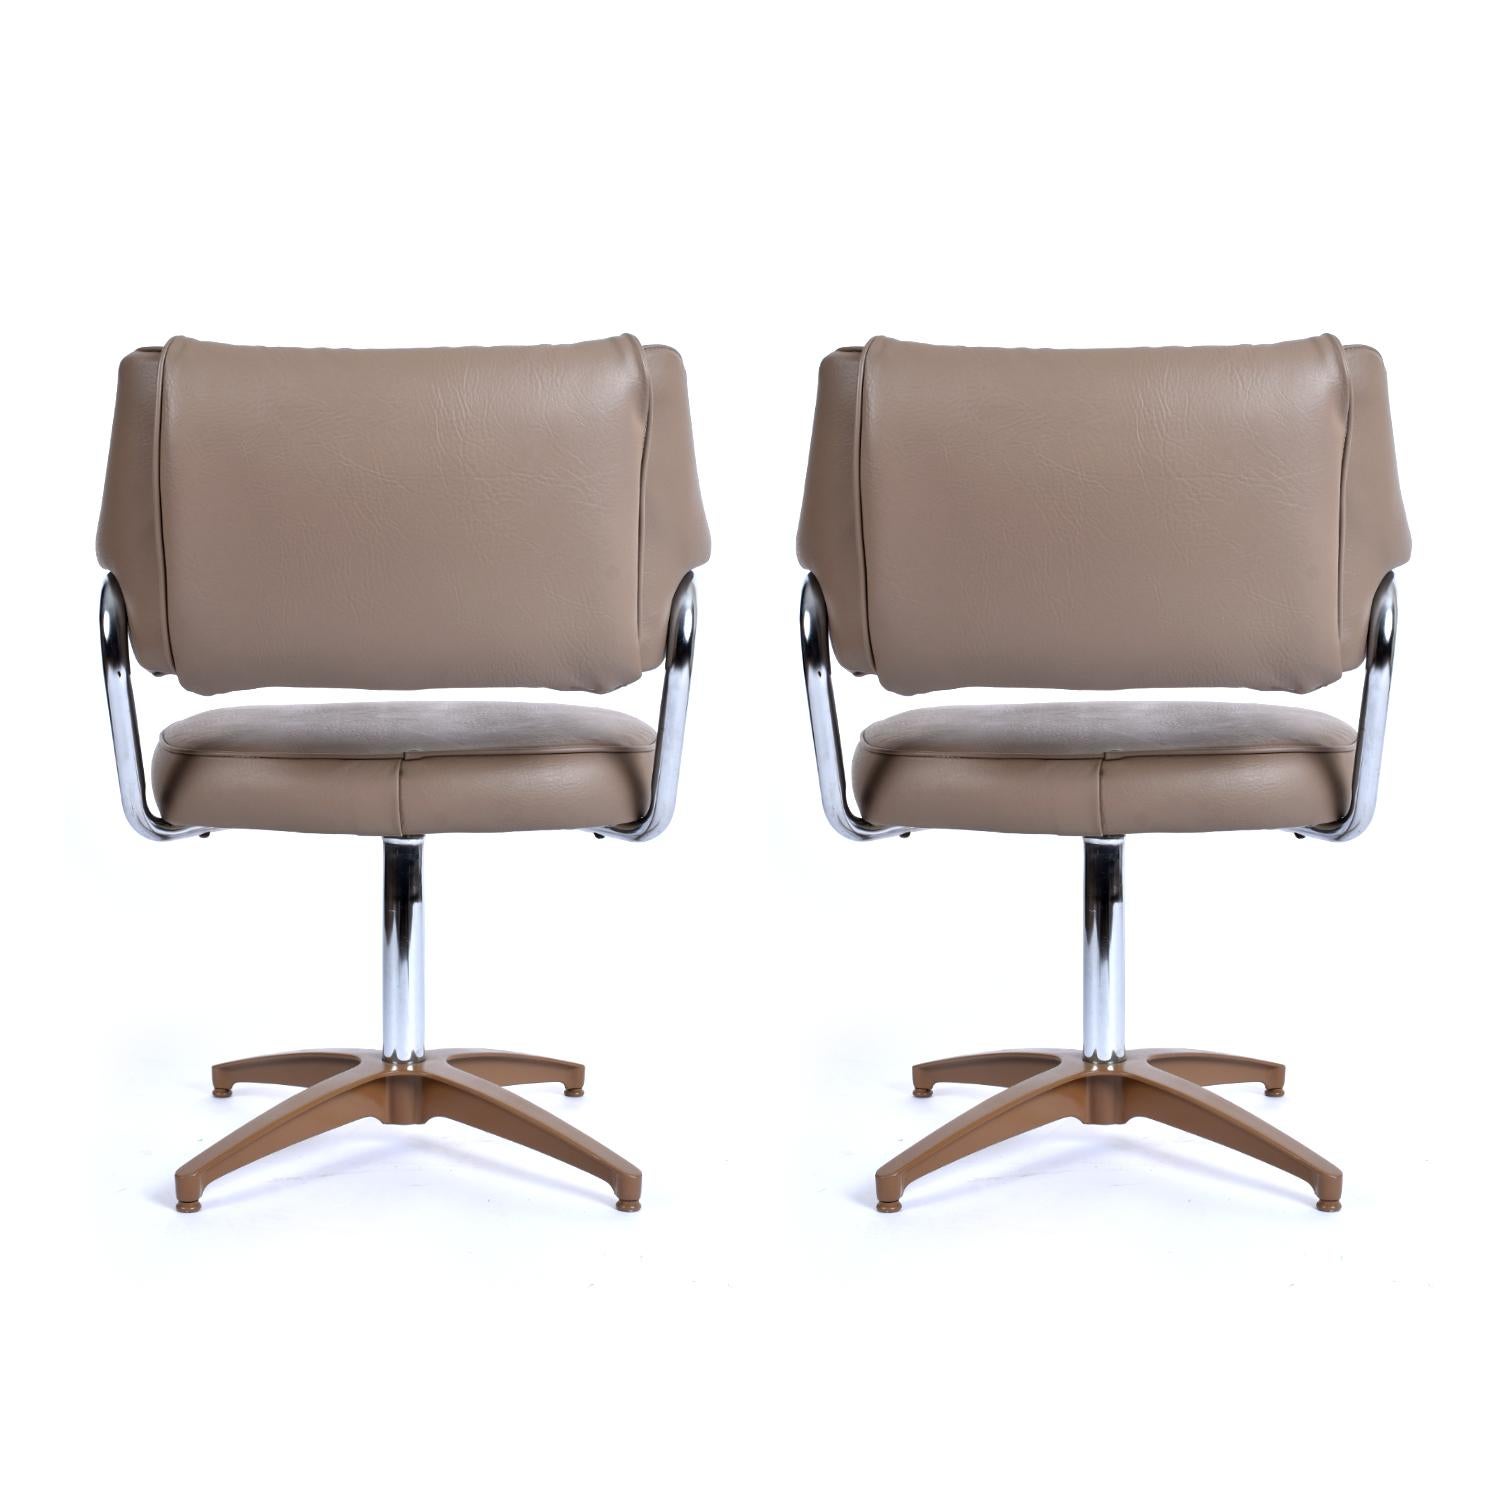 Late 20th Century Set of 6 Mid-Century Modern Beige and Chrome Swivel Task Chairs